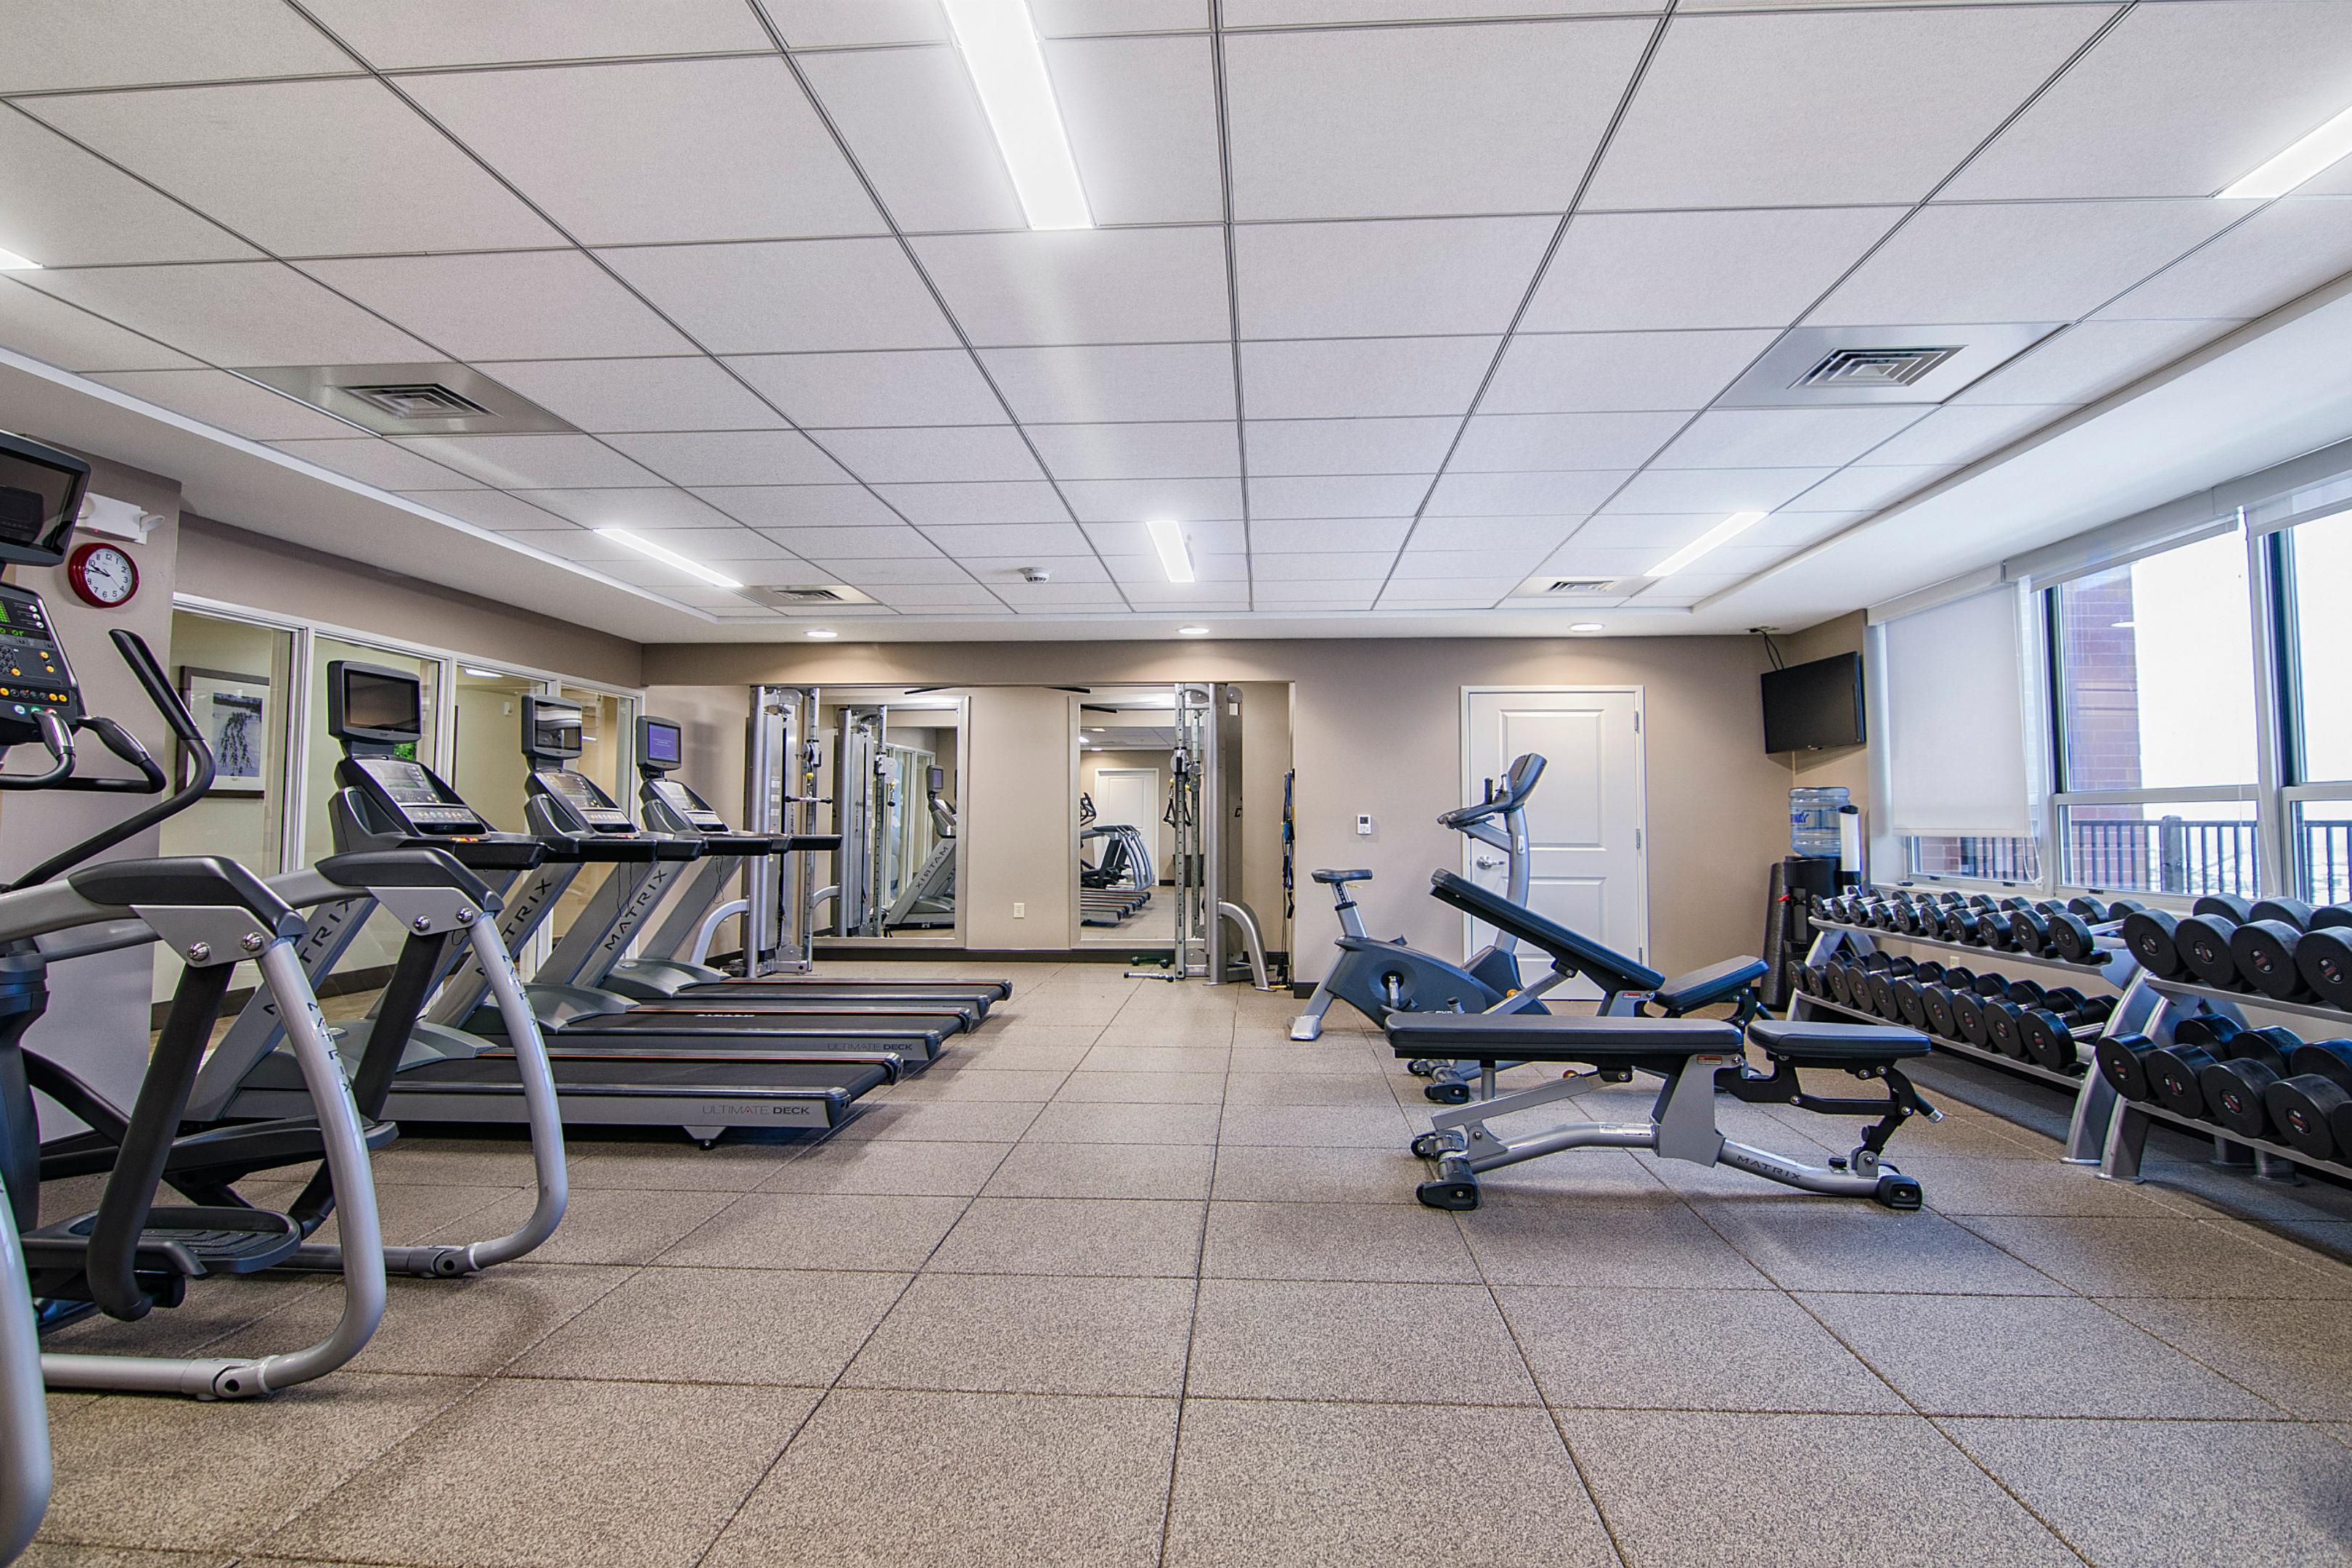 When you stay at the Staybridge Suites Marquette, there's no need to pause your fitness routine due to travel. Our expanded Fitness Center offers a variety of machines and weights to keep you looking fit and feeling great! Plus, we offer fantastic views of Marquette and plenty of natural light. So bring on the endorphins and stay fit with us!